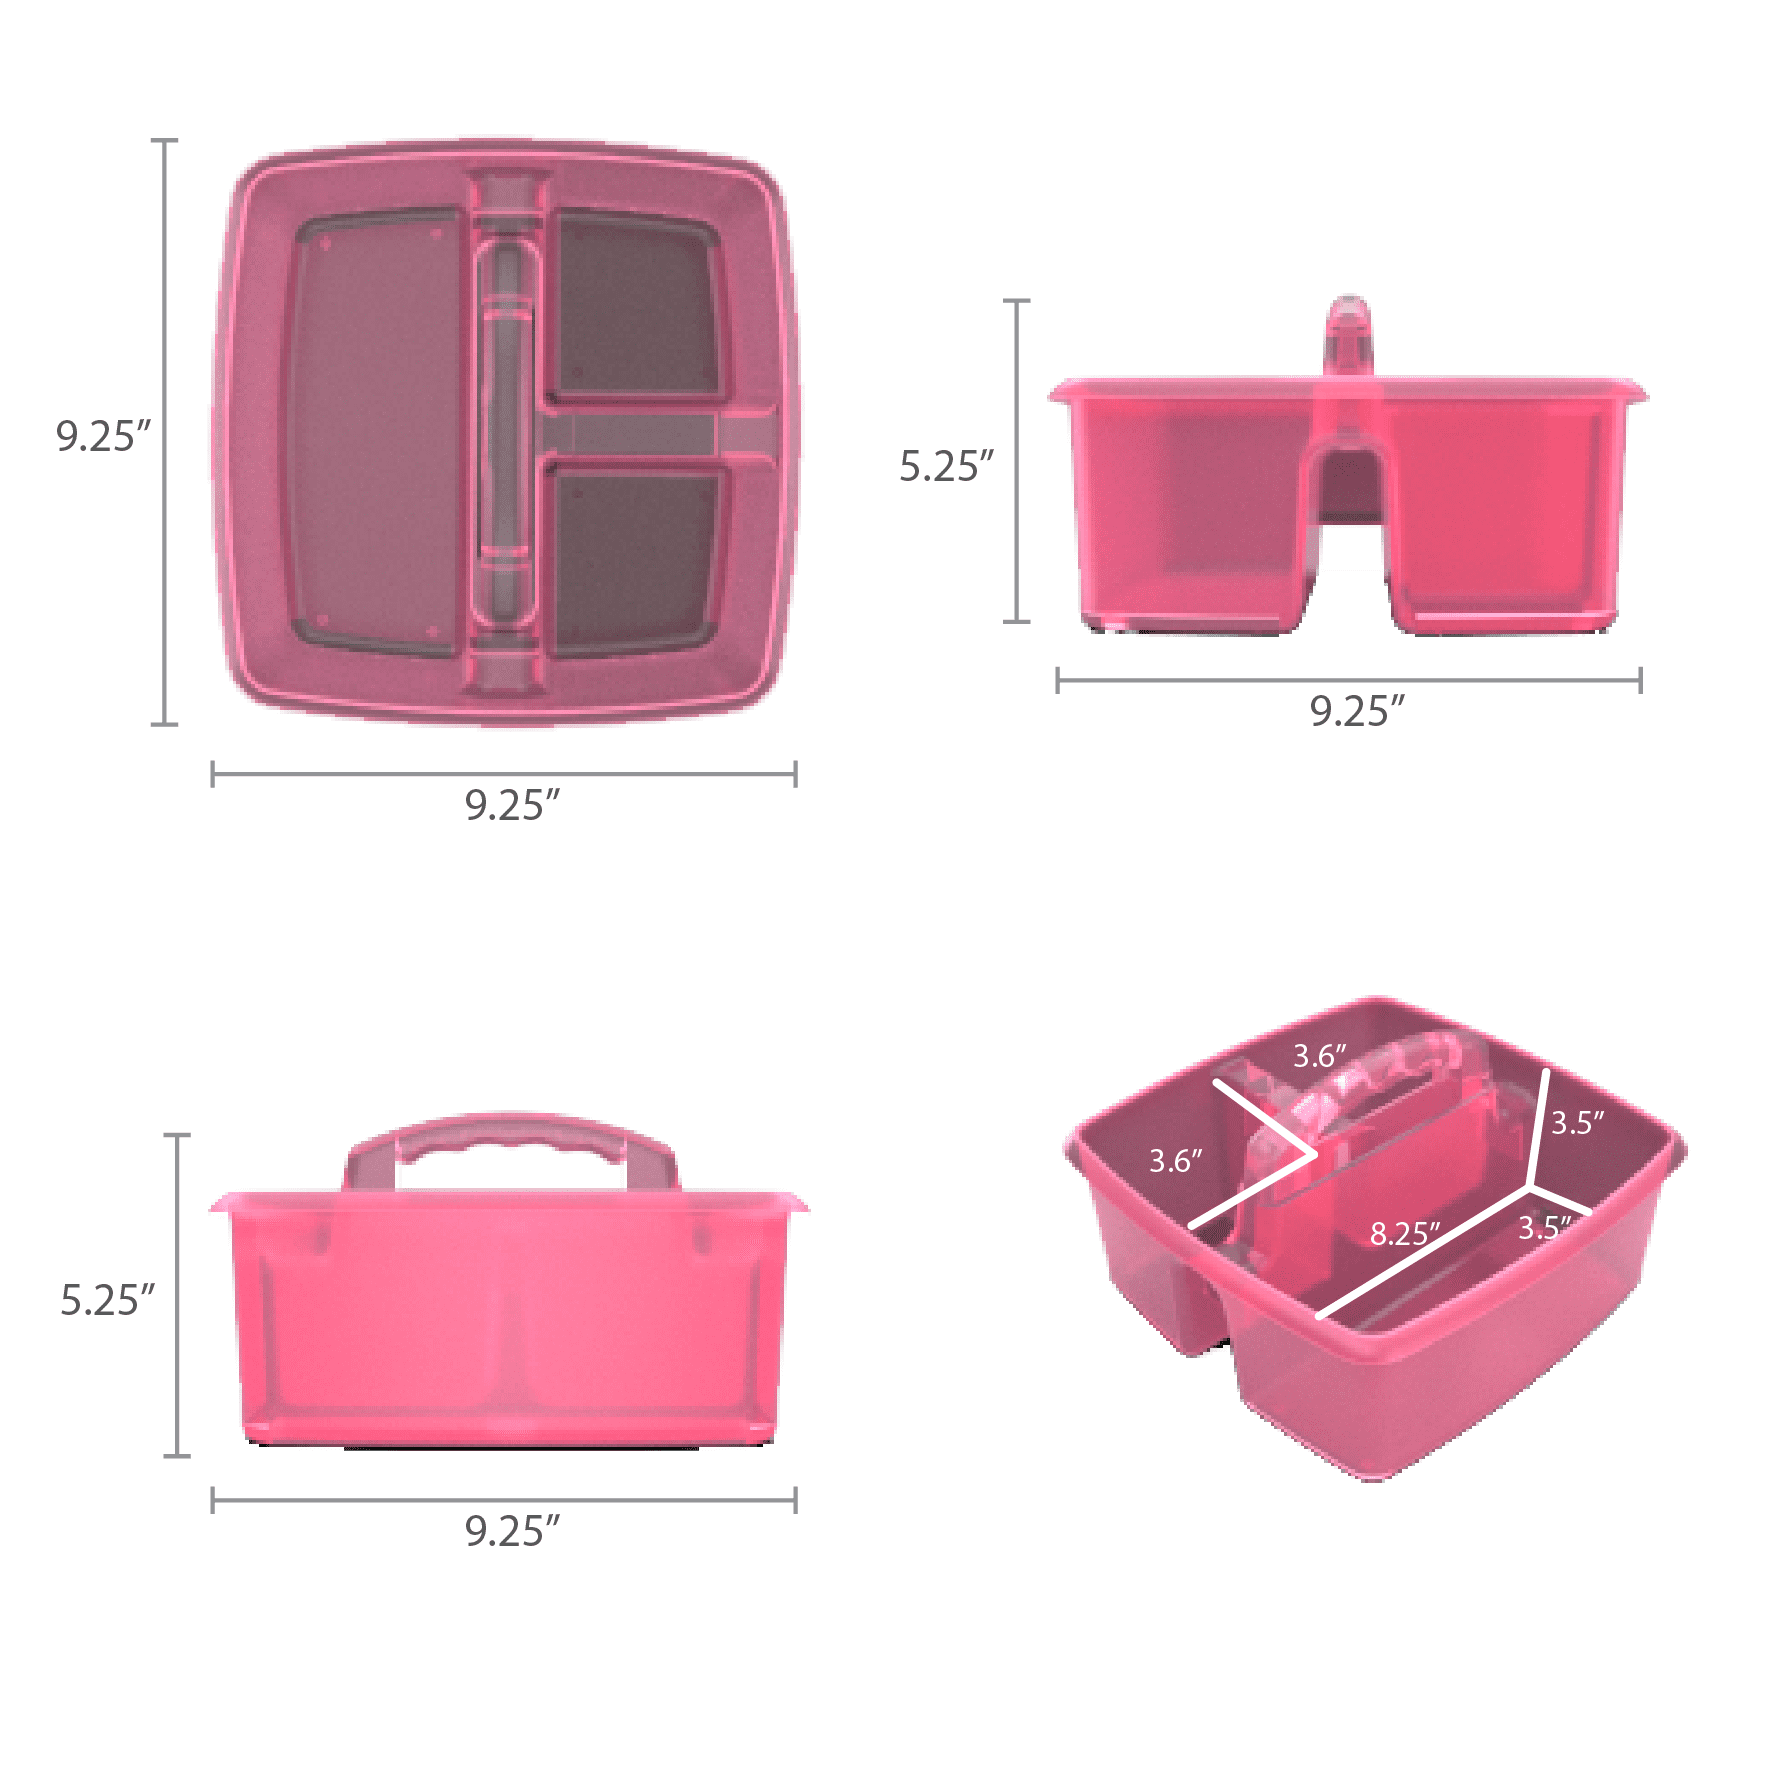 AtMini Art Caddy Organizer with Handle Stackable Multipurpose Plastic Caddy  for Office, Makeup, Dormitory, Classroom, Cabinet Caddy etc - Square Pink